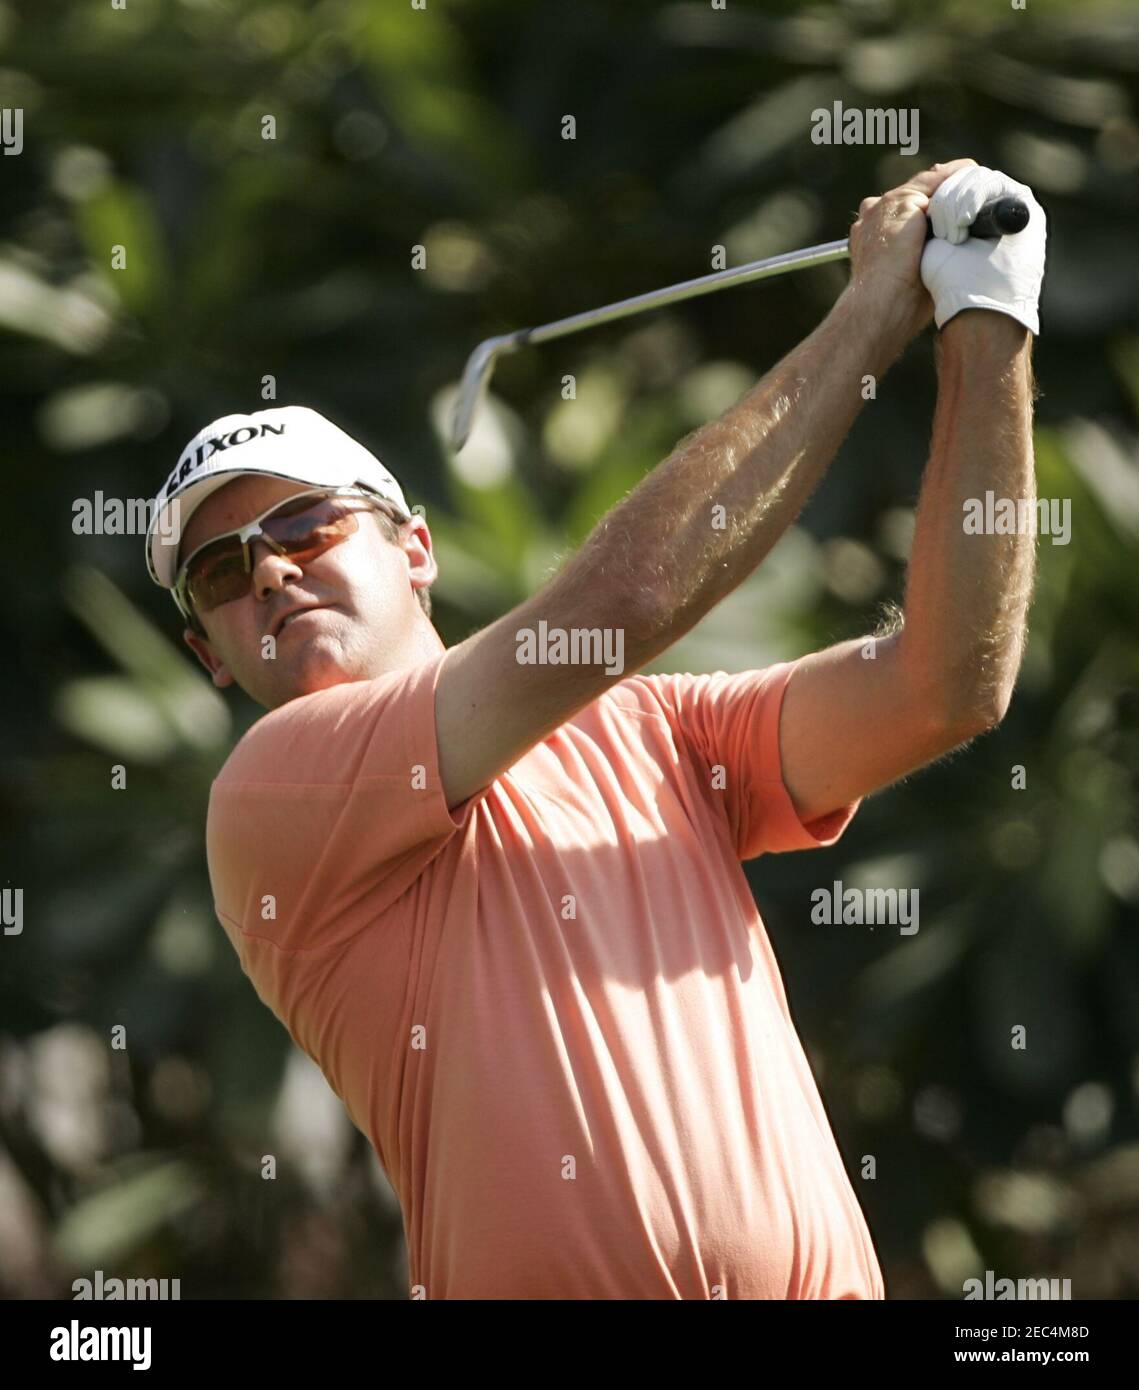 Golf - Johnnie Walker Classic - DLF Golf and Country Club, Gurgaon, India -  1/3/08 Mark Brown - New Zealand during the third round Mandatory Credit:  Action Images / Brandon Malone Stock Photo - Alamy